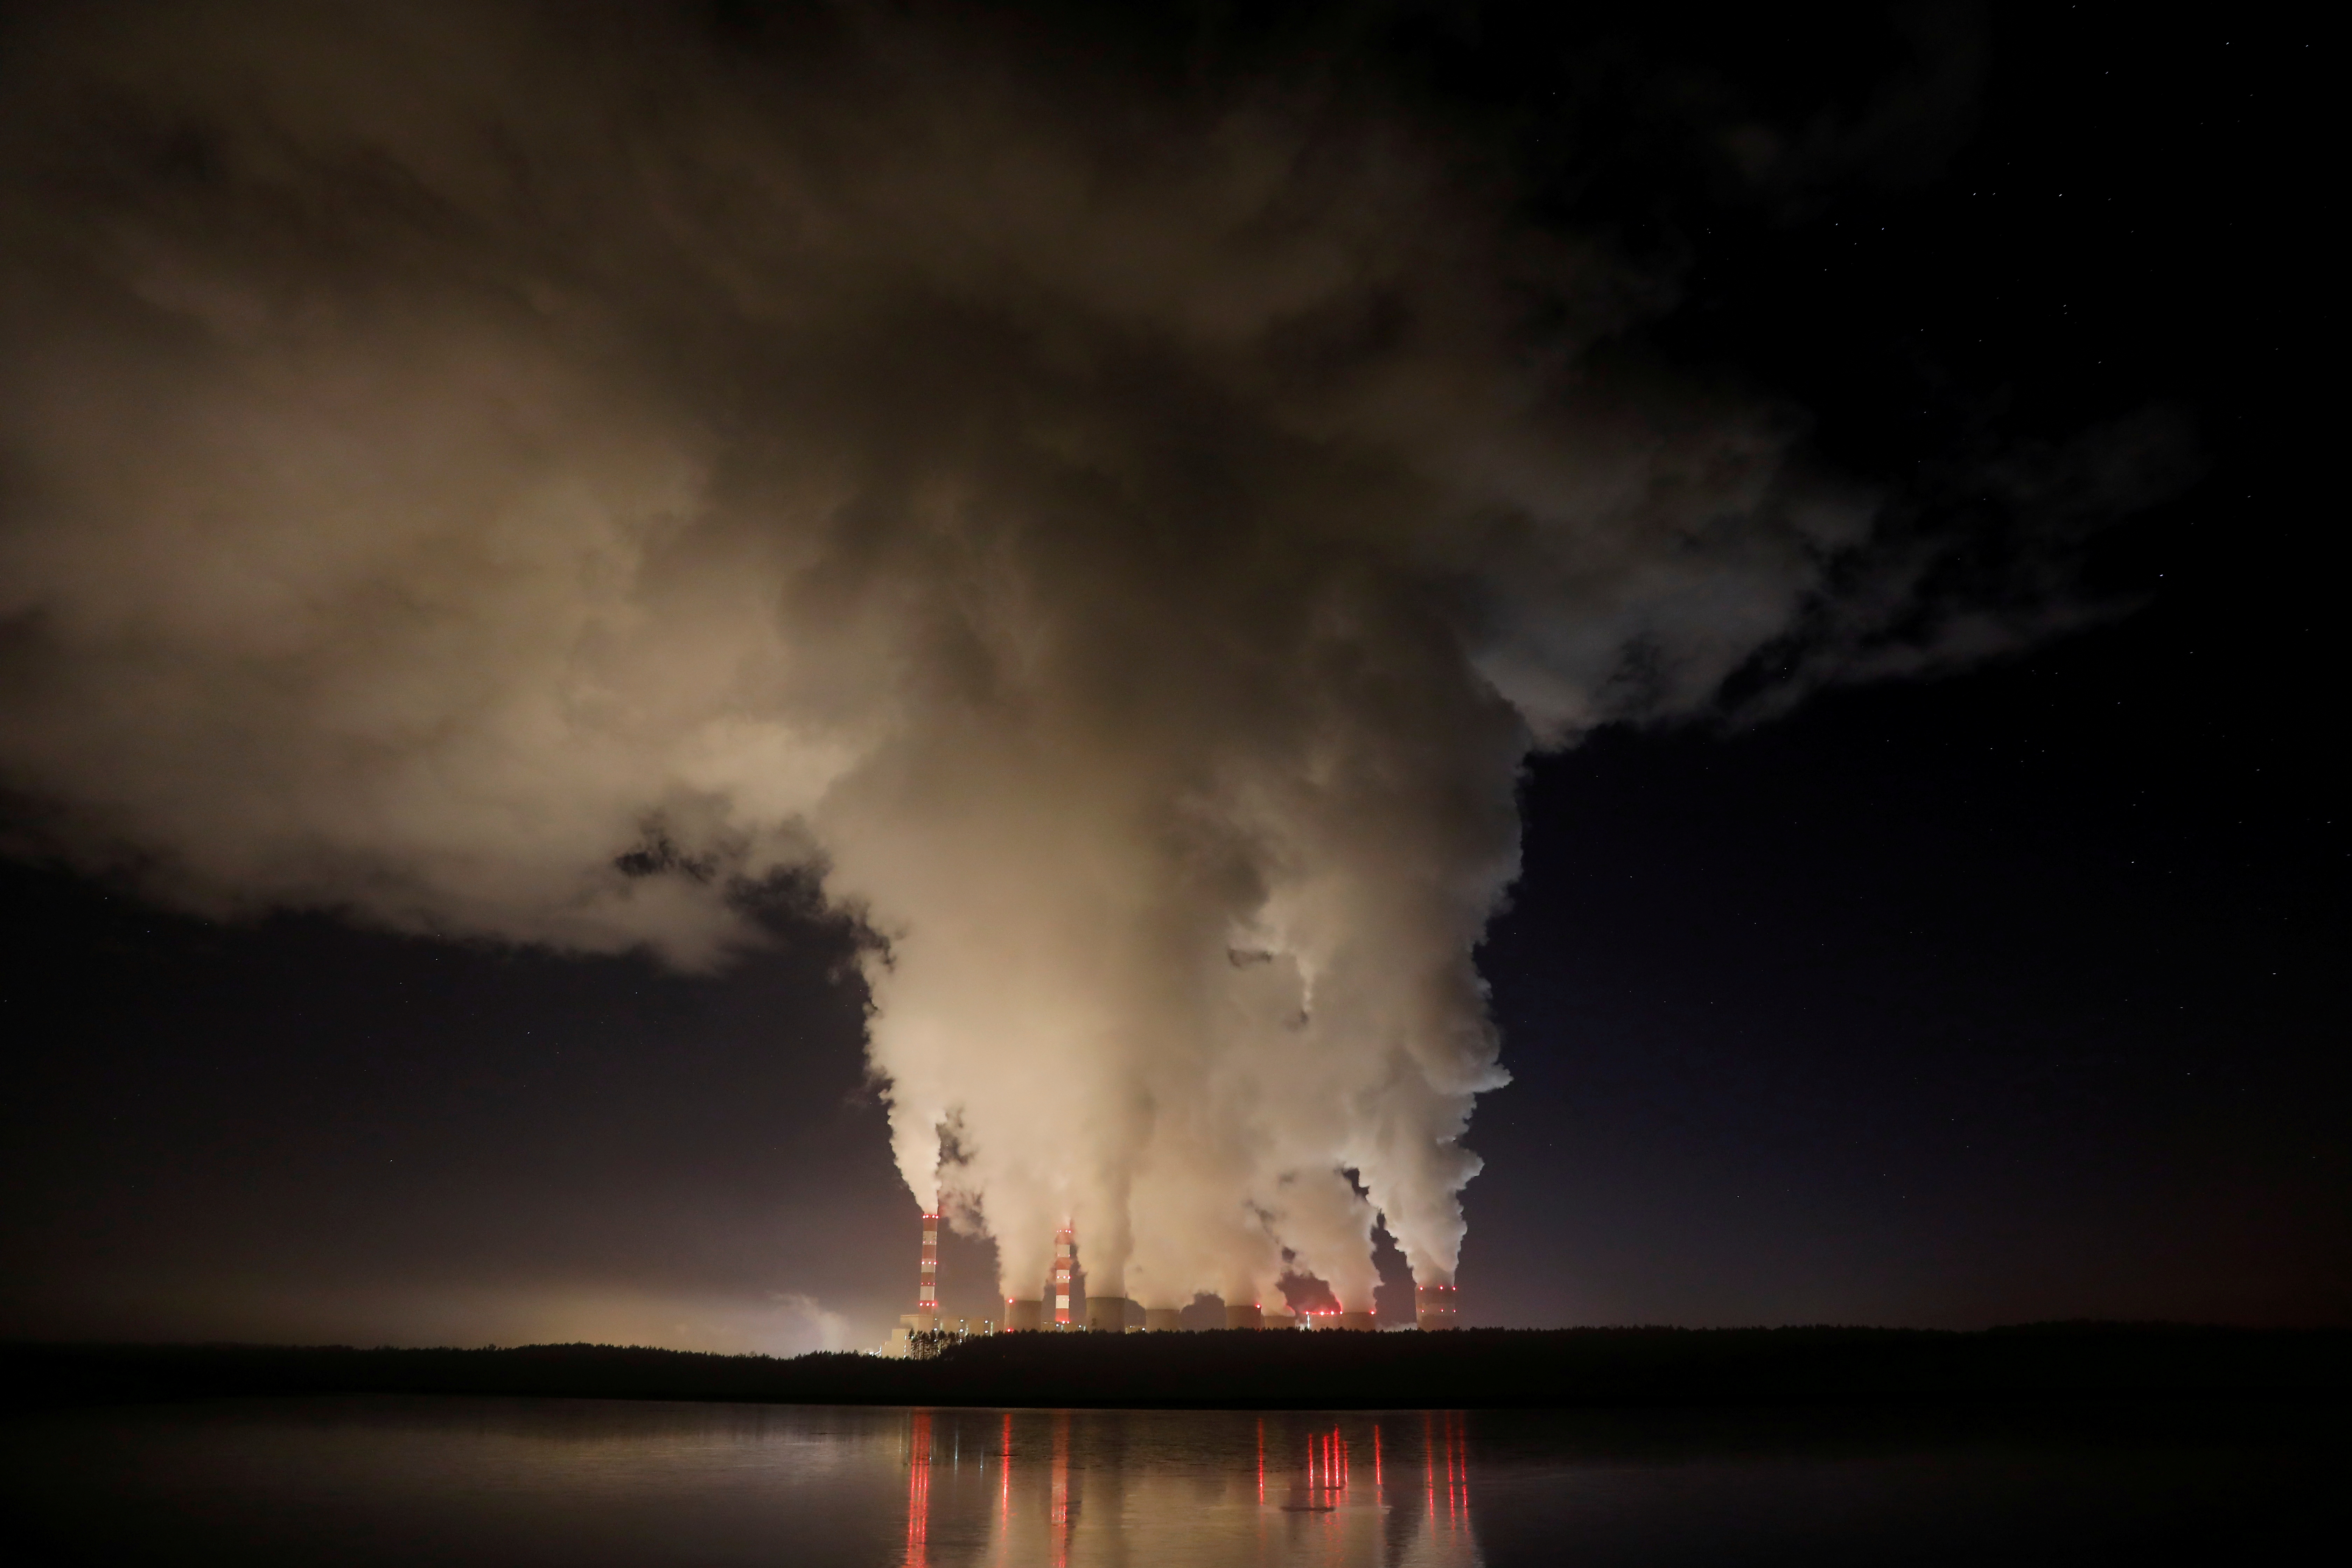 Smoke and steam billow from Belchatow Power Station, Europe's largest coal-fired power plant operated by PGE Group, at night near Belchatow,